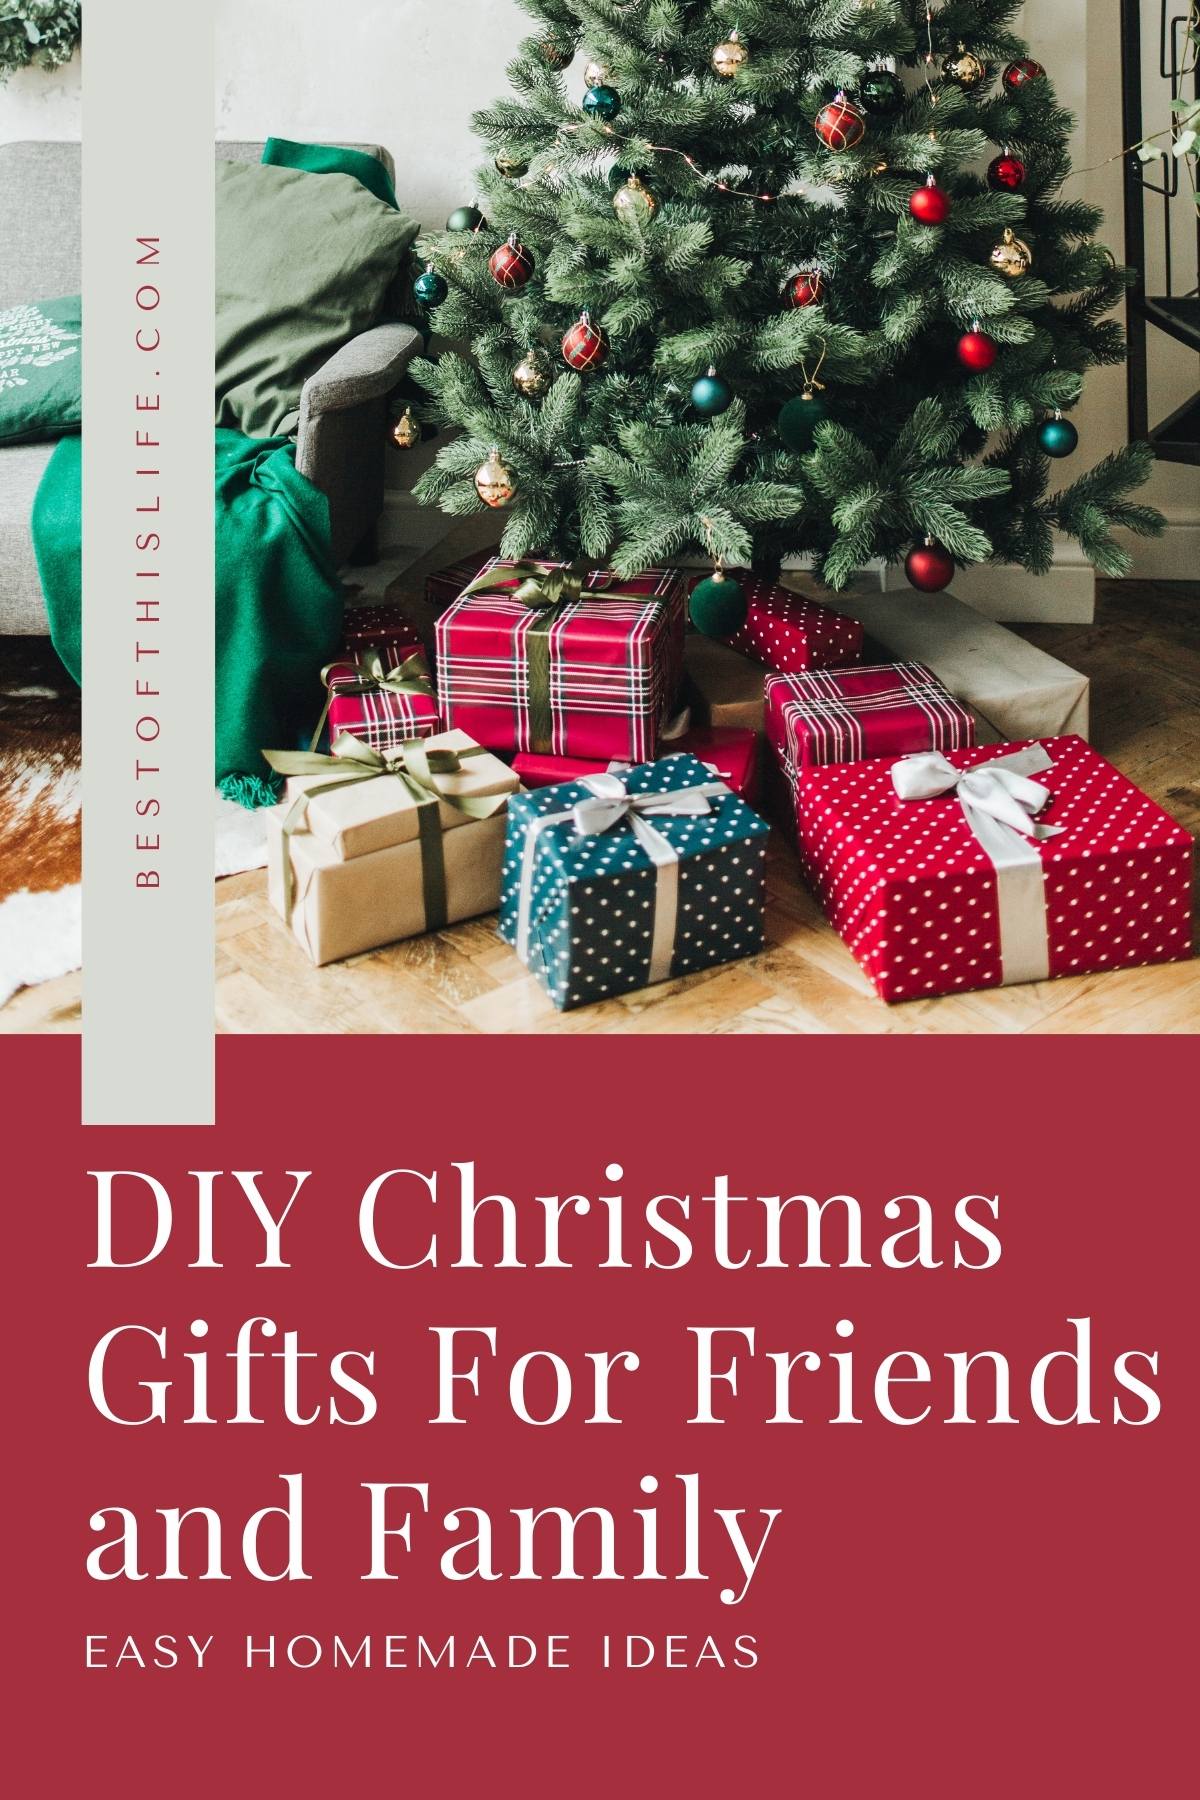 15 Easy DIY Christmas Gifts For Friends and Family